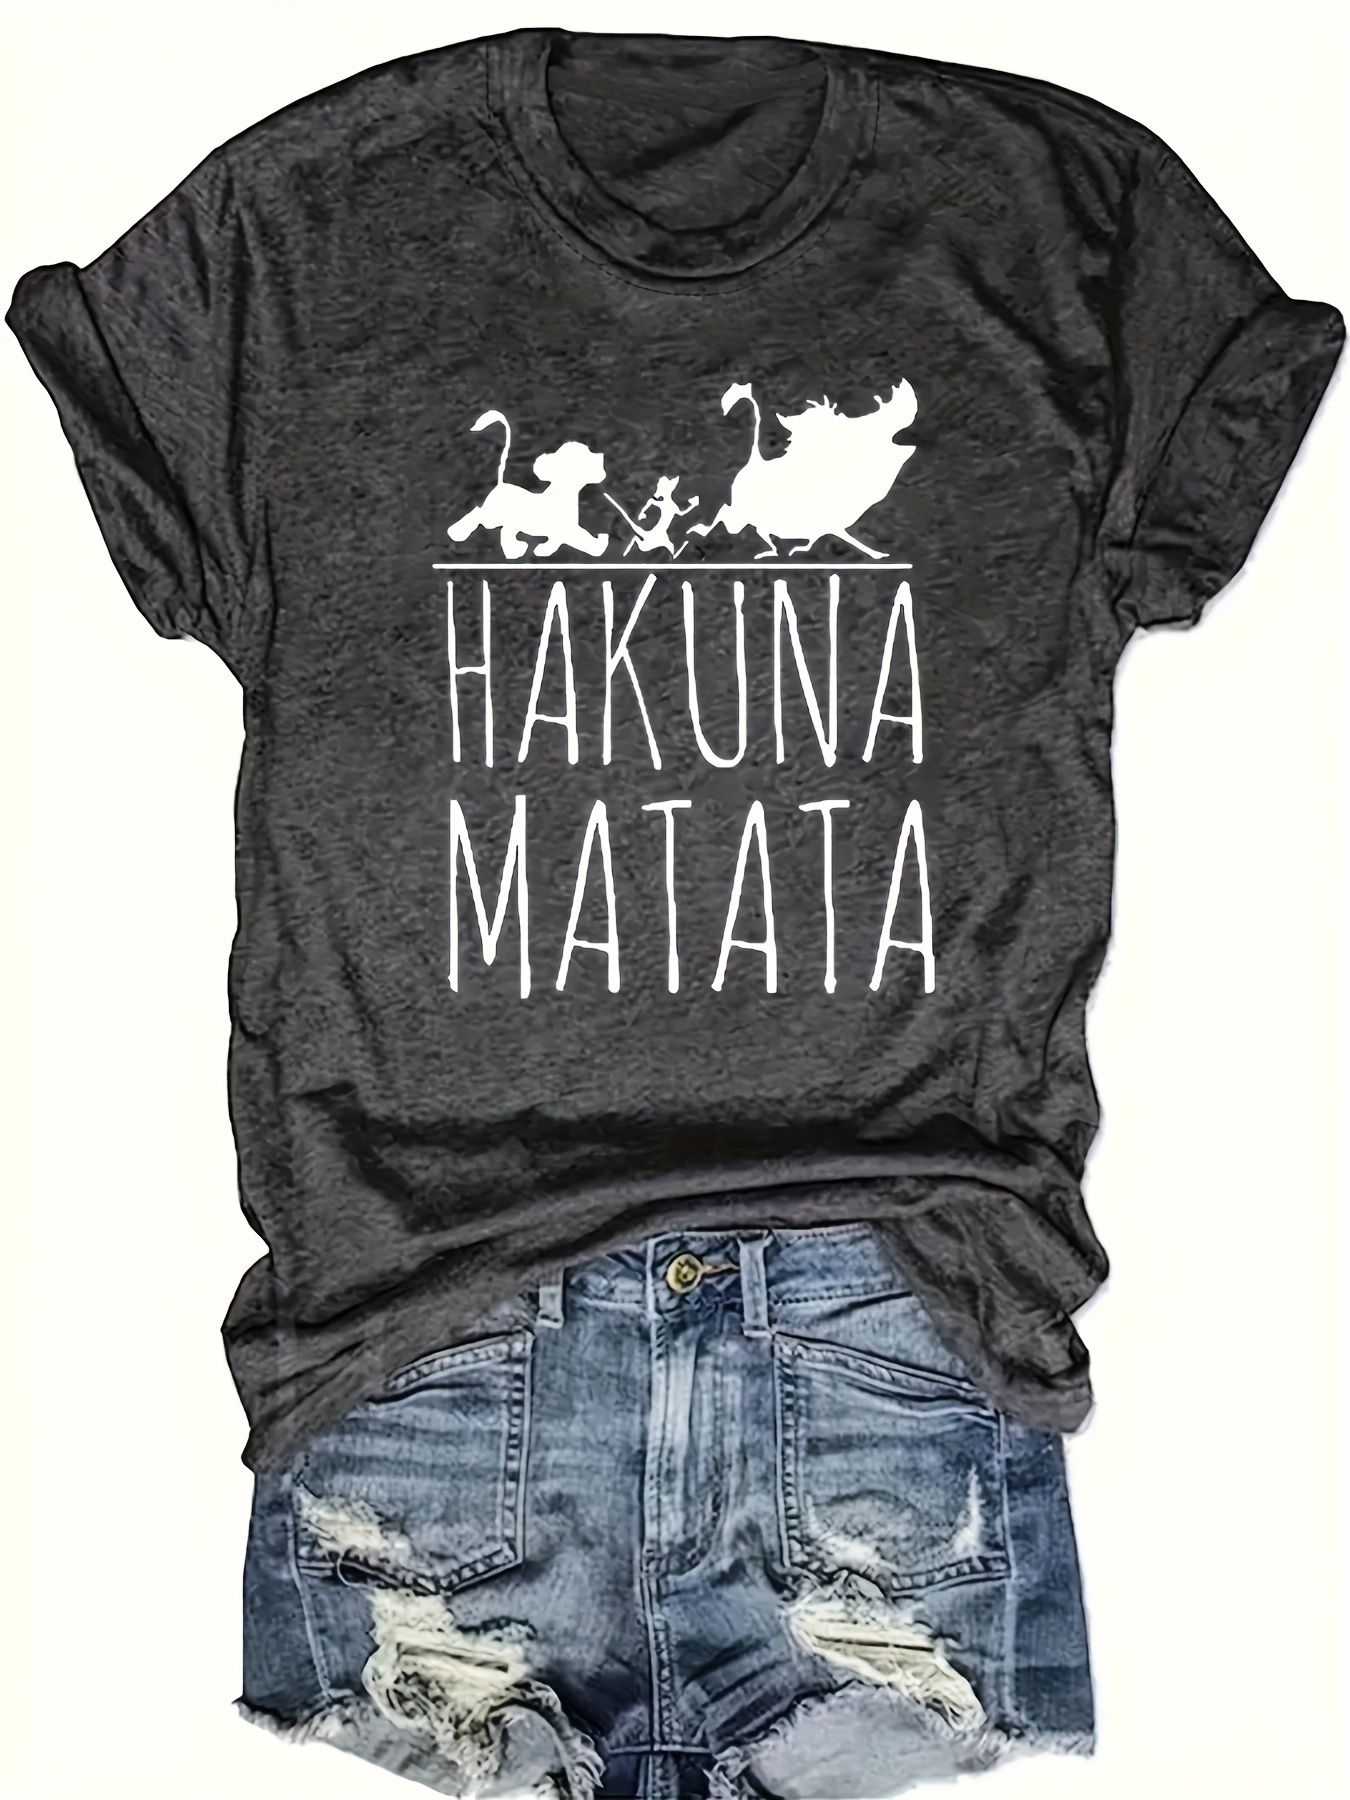 Plus Size Hakuna Print T-Shirt, Casual Short Sleeve Crew Neck T-Shirt For Spring & Summer, Women's Plus Size Clothing